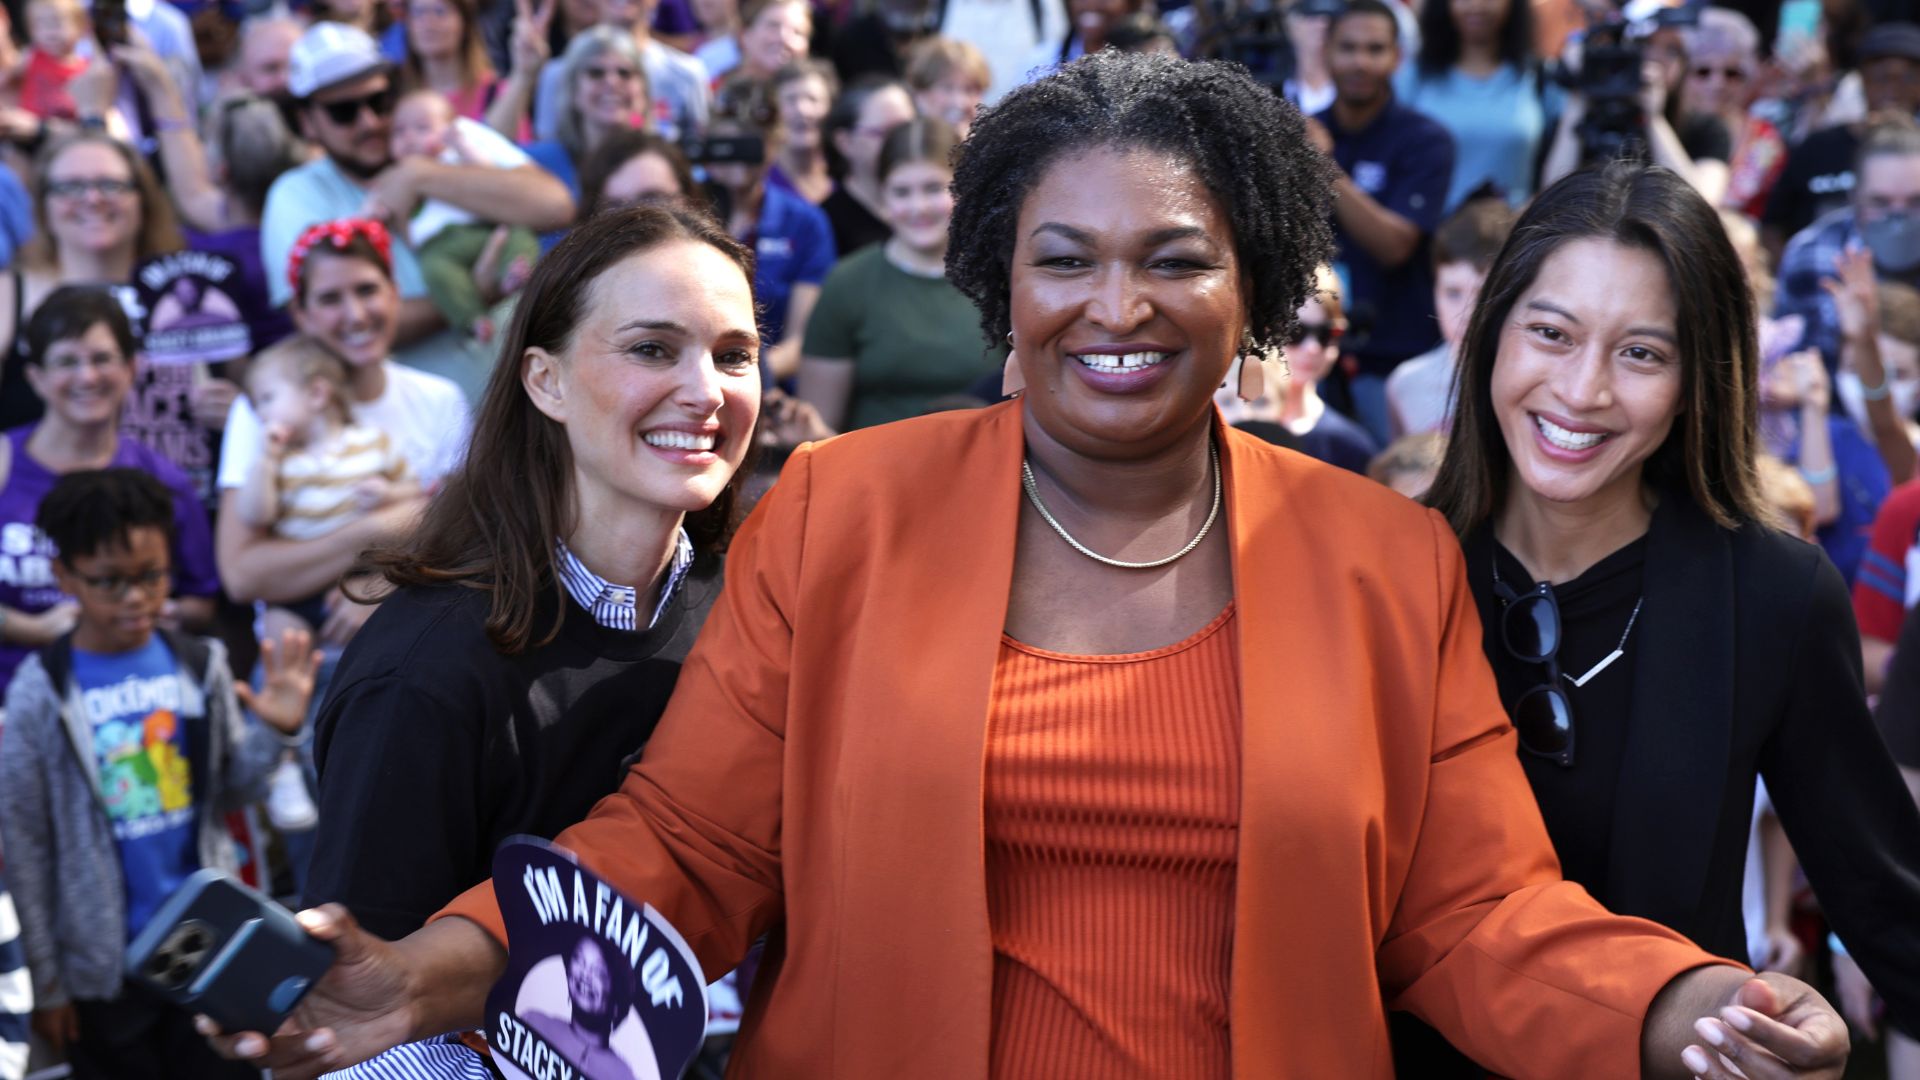 stacey-abrams-claims-she-can-win-if-voters-‘navigate’-gop-voter-suppression